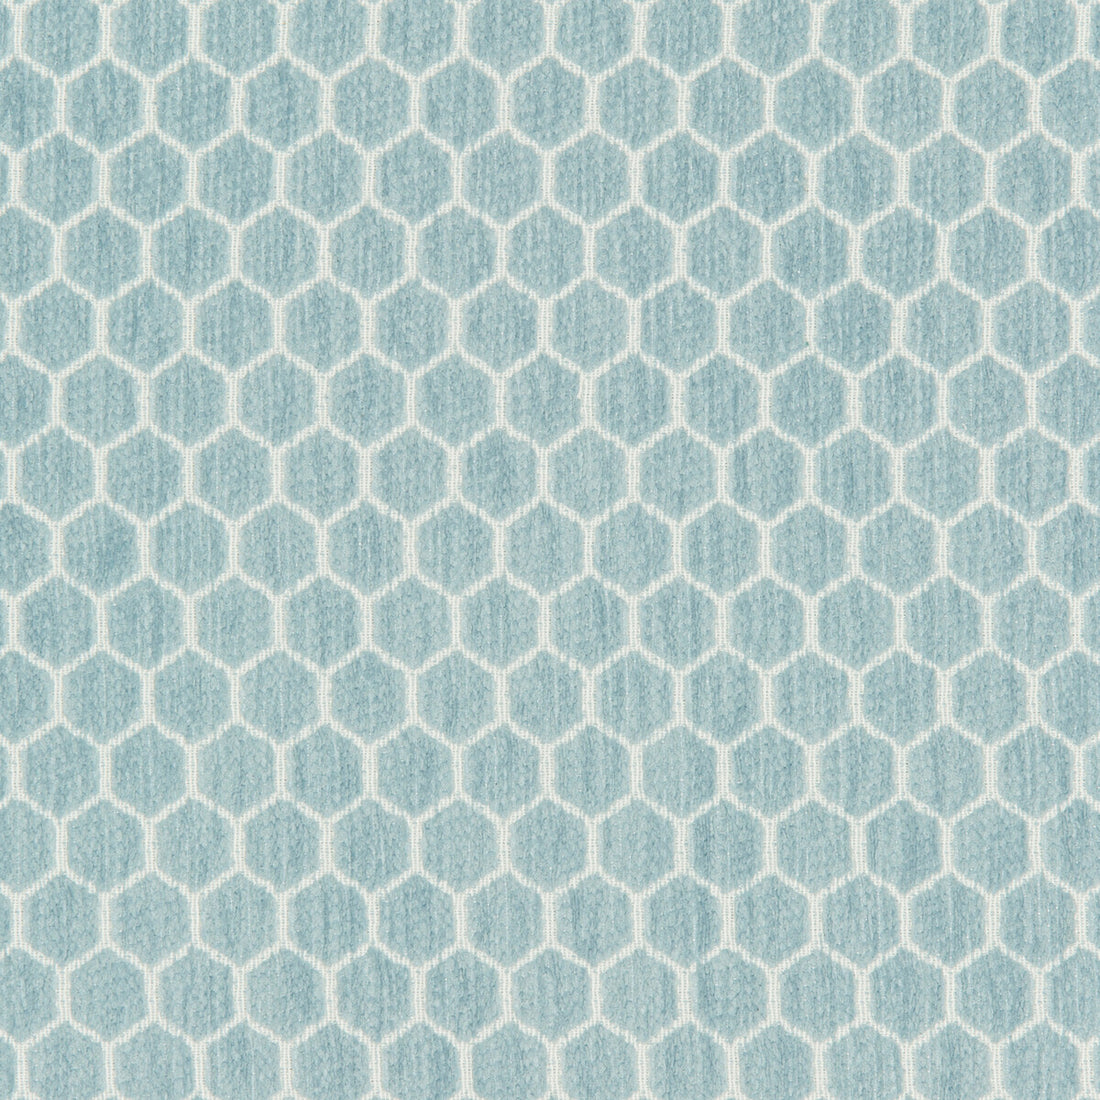 Kravet Design fabric in 36081-1115 color - pattern 36081.1115.0 - by Kravet Design in the Inside Out Performance Fabrics collection